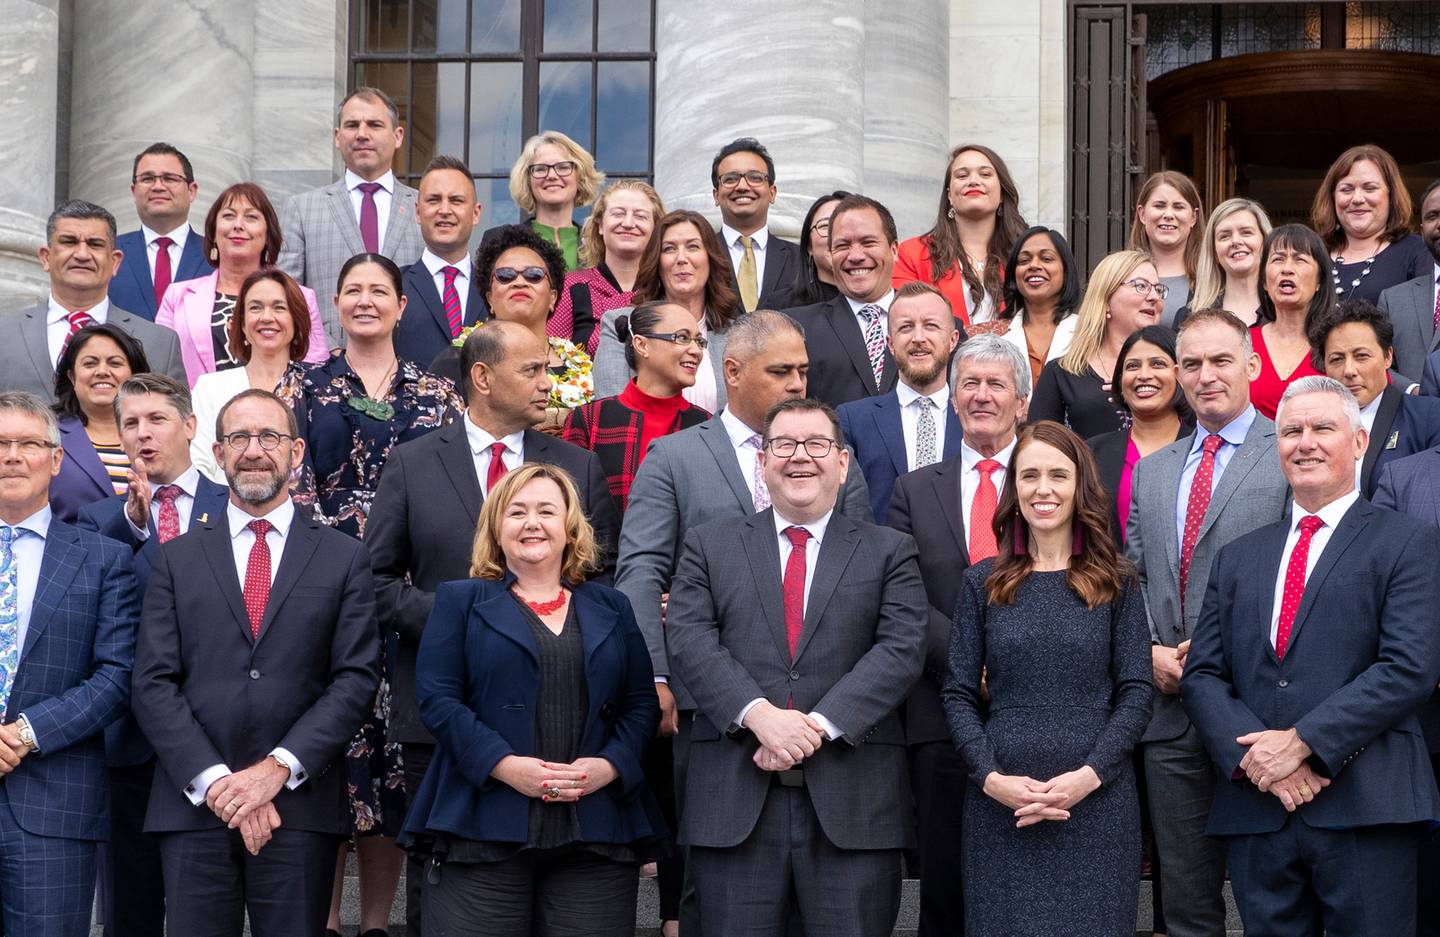 MP for Hamilton West Dr Gaurav Sharma (back row, centre) seen with his Labour colleagues on the...